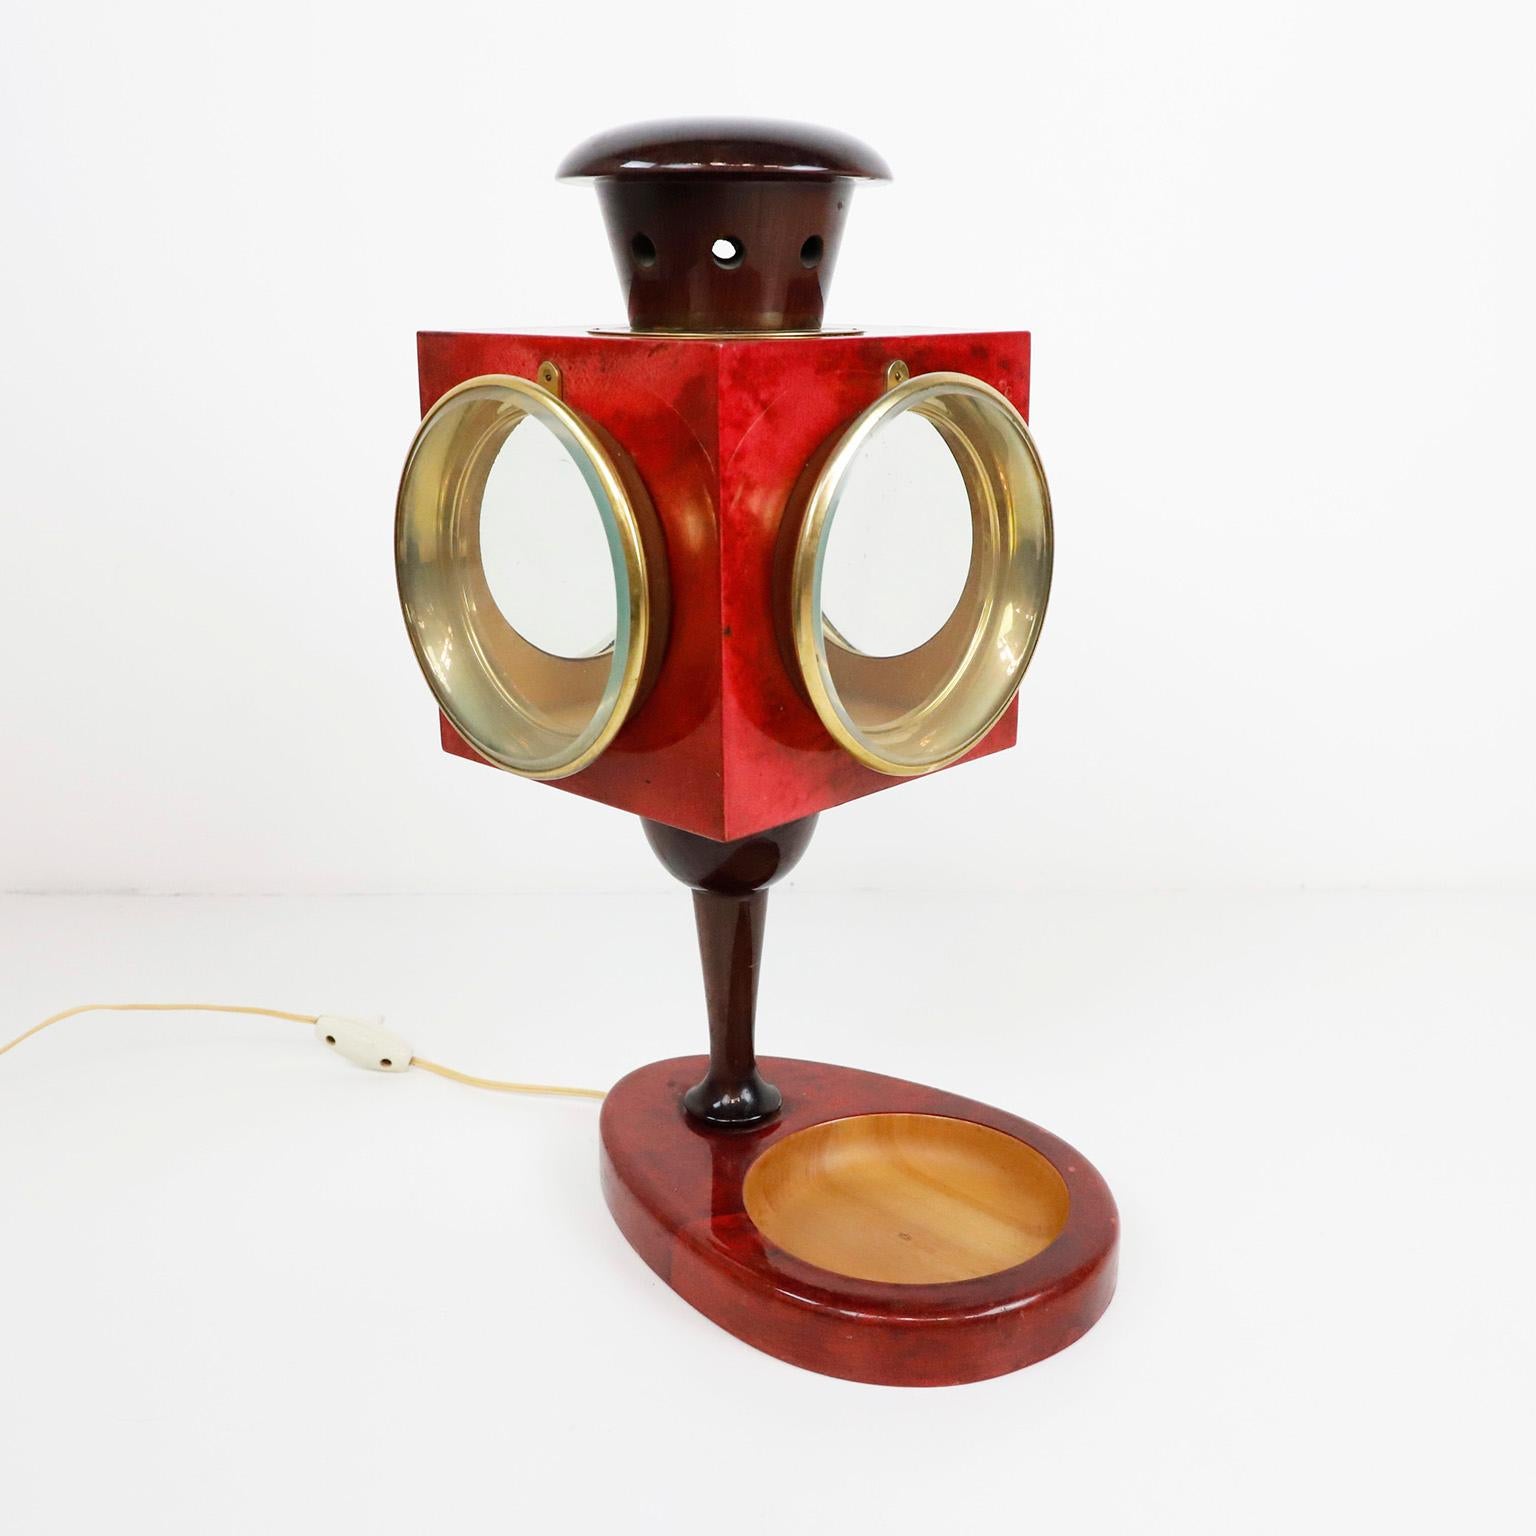 Big size lantern table lamp made by Aldo Tura, Italy in the 1950s.

The lamp are made in lacquered red goatskin with brass rings working in very good condition.

Note: The ignition switch has a small crack.